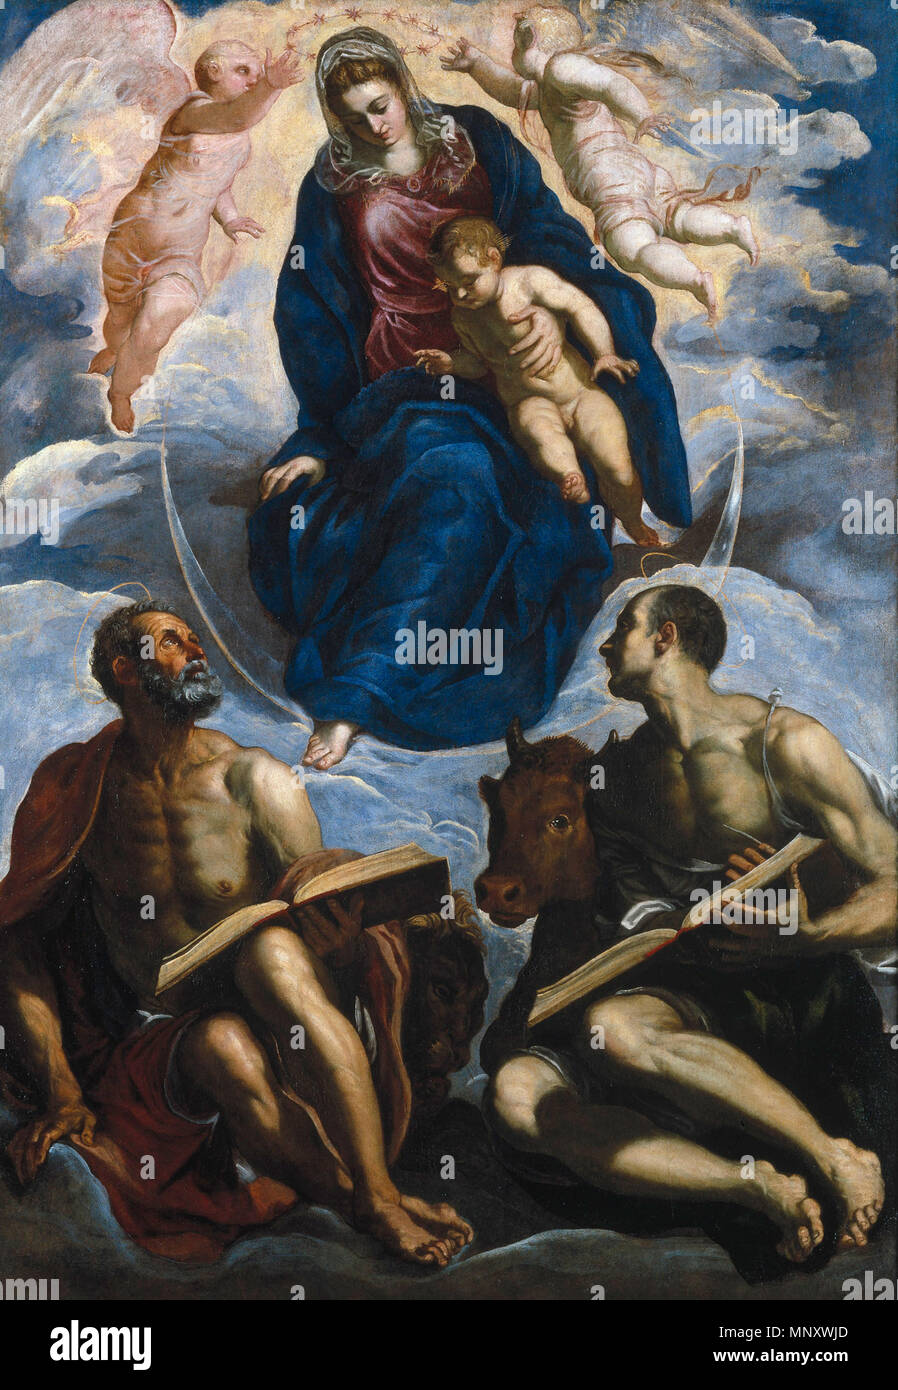 Mary with the Child, Venerated by St. Marc and St. Luke   before 1570.   1194 Tintoretto - Mary with the Child, Venerated by St. Marc and St. Luke - Google Art Project Stock Photo